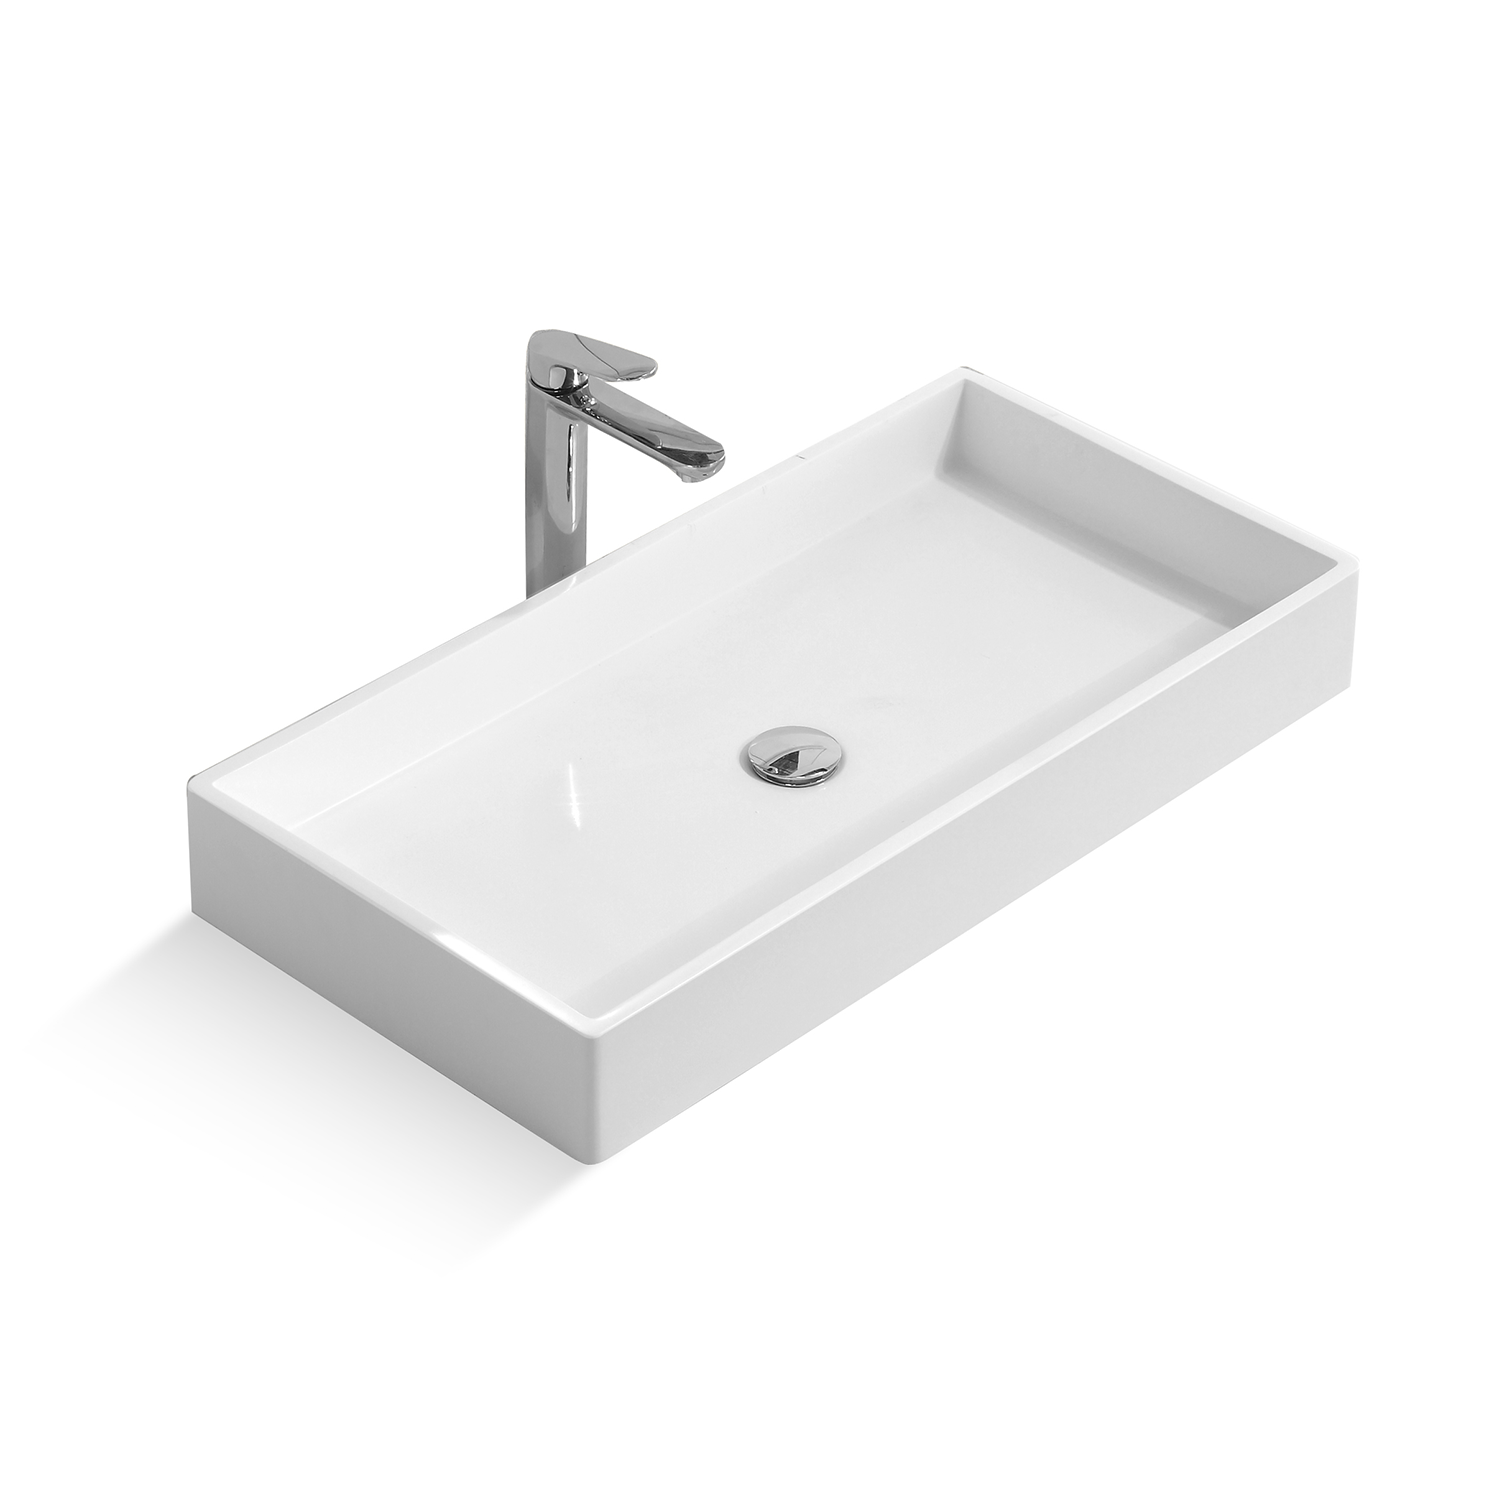 DAX Solid Surface Rectangle Single Bowl Bathroom Vessel Sink, White Finish,  31-1/2 x 15-3/4 x 4-1/8 Inches (DAX-AB-1327)